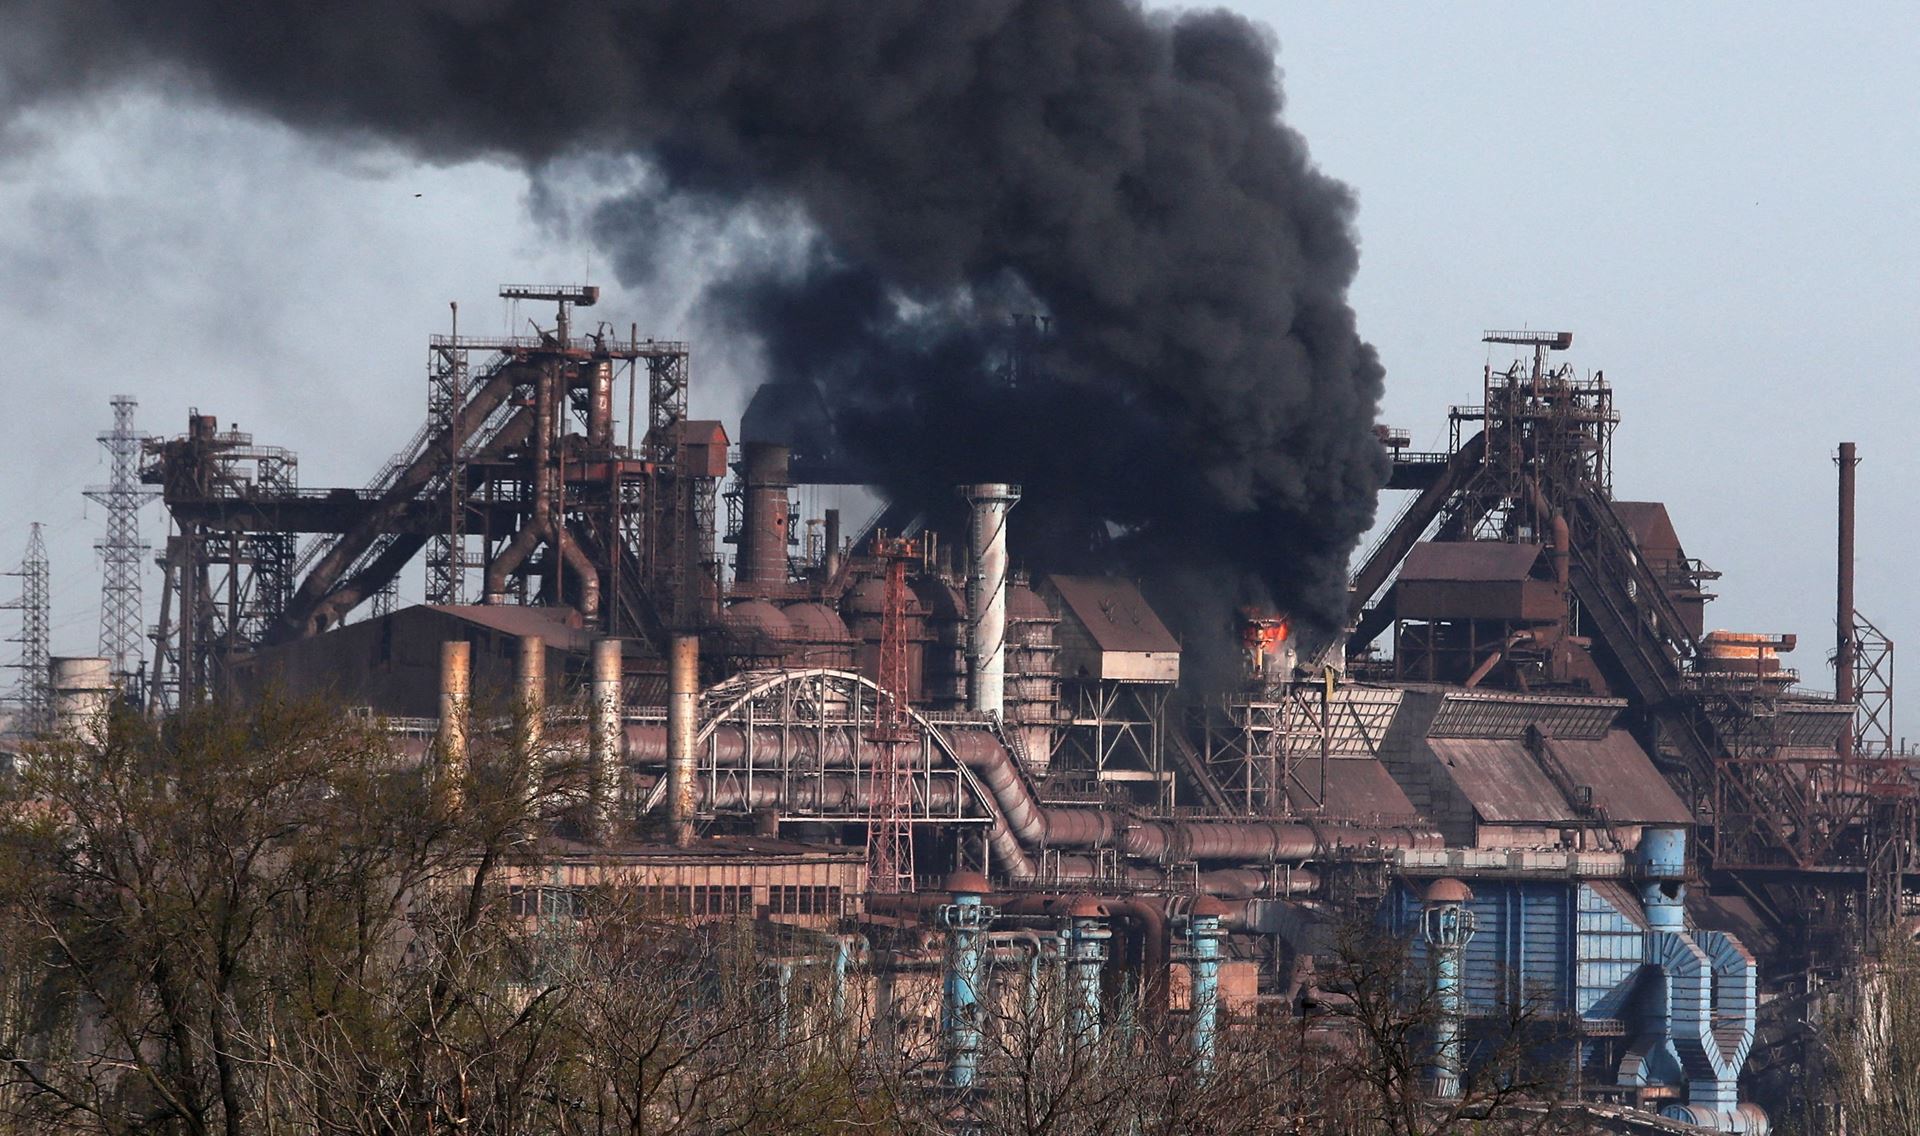 Ukraine's metallurgical industry has lost most of its potential